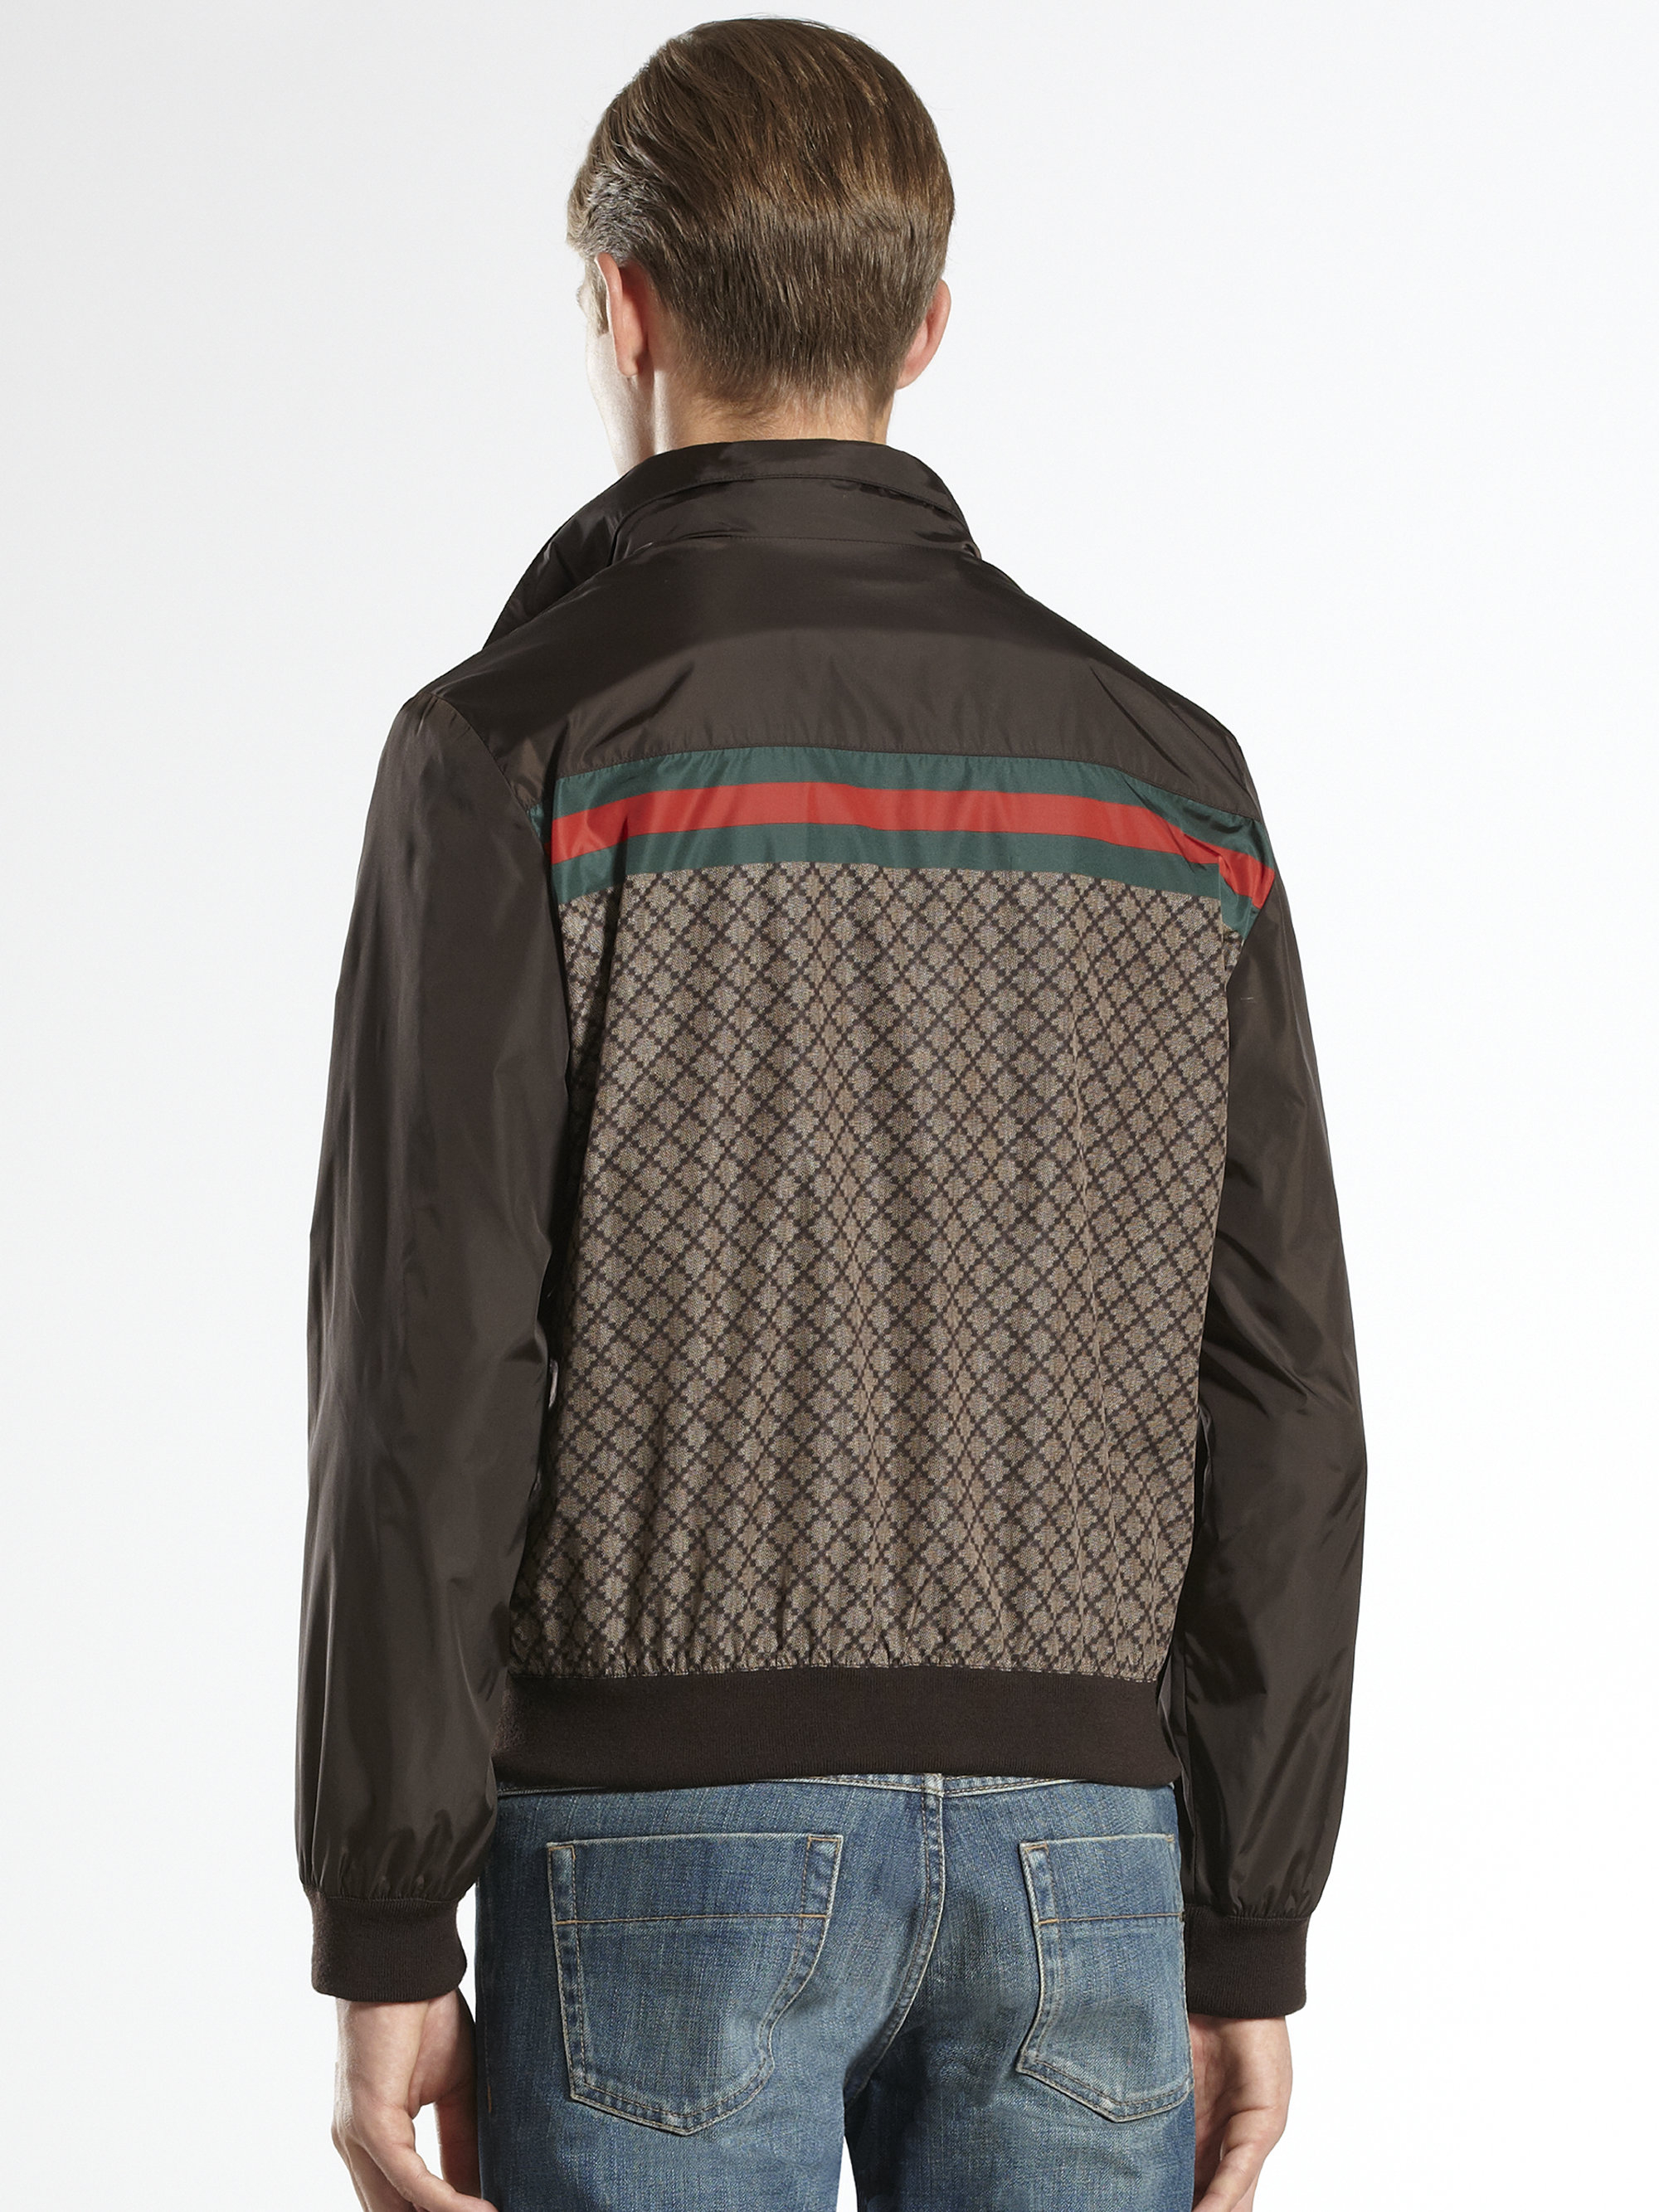 Lyst - Gucci Diamante Jacket in Brown for Men